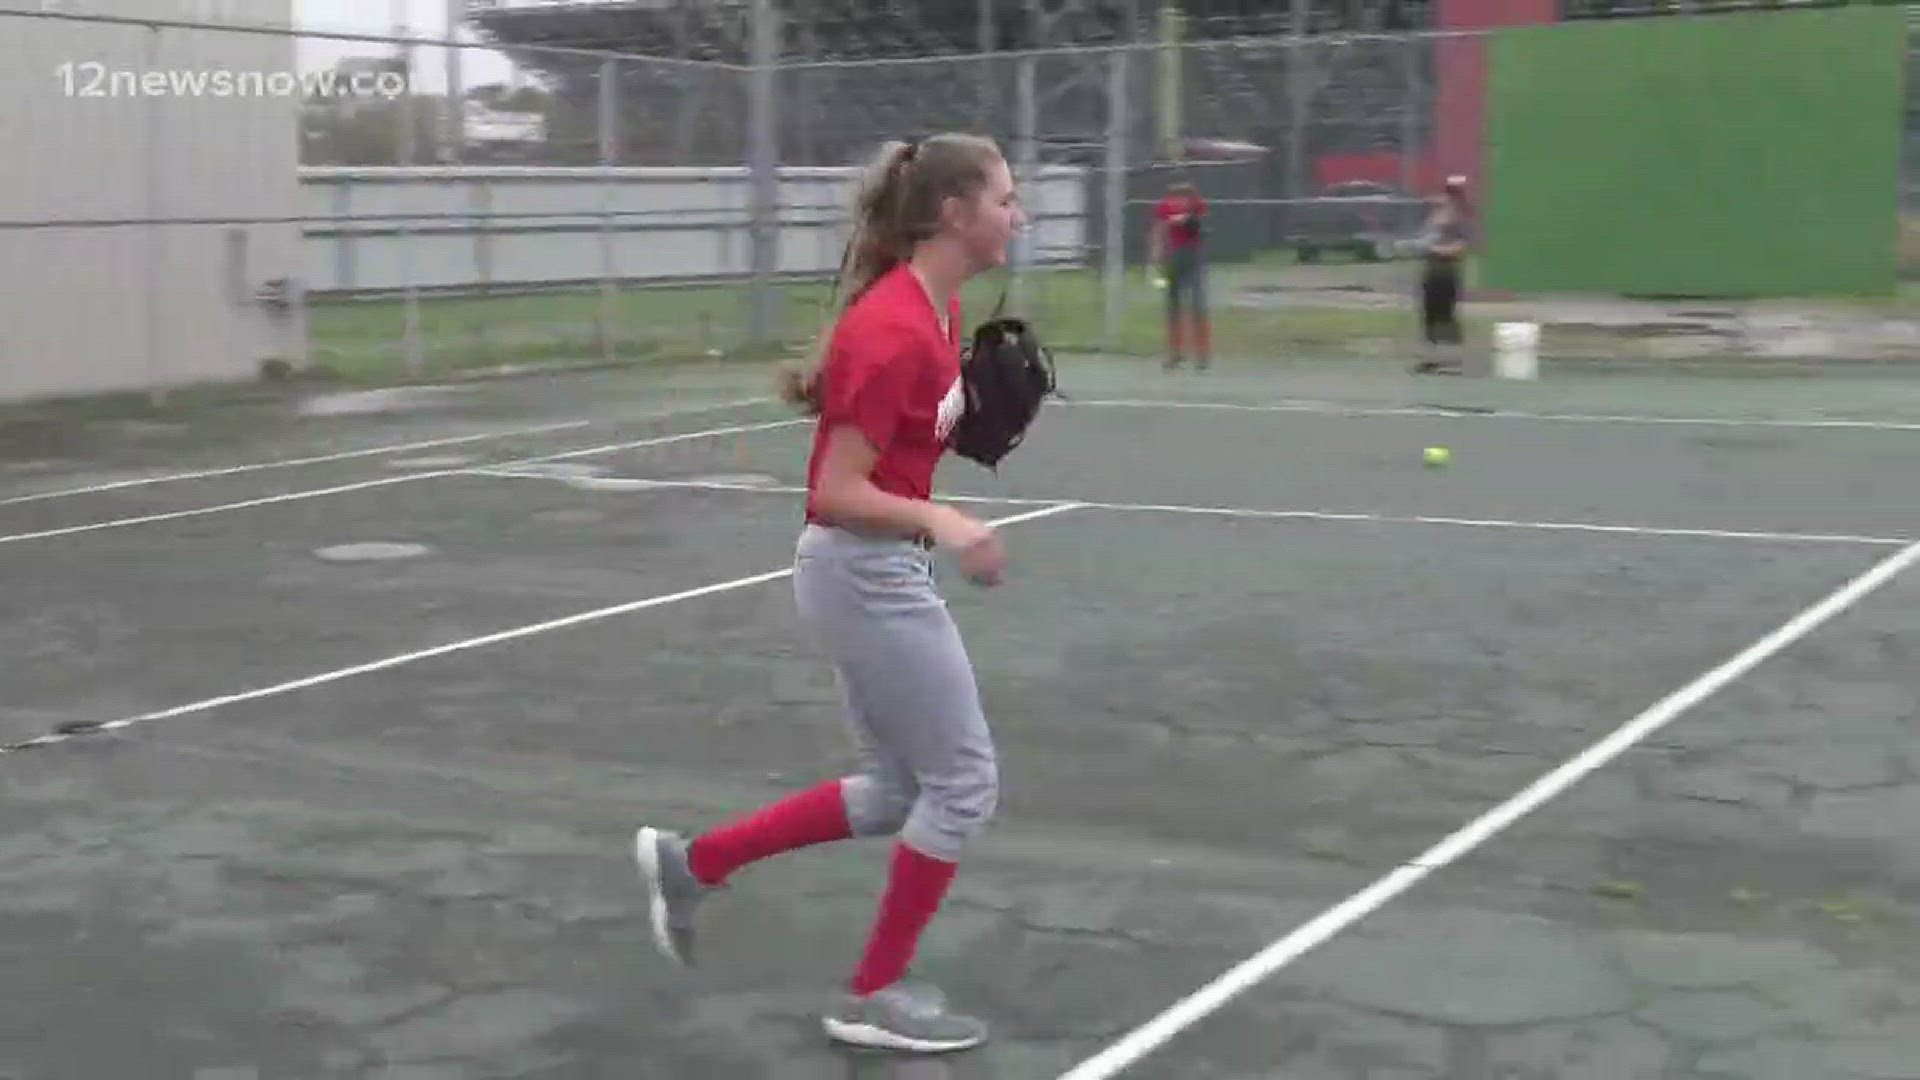 The Cardinals call her "The Athlete".